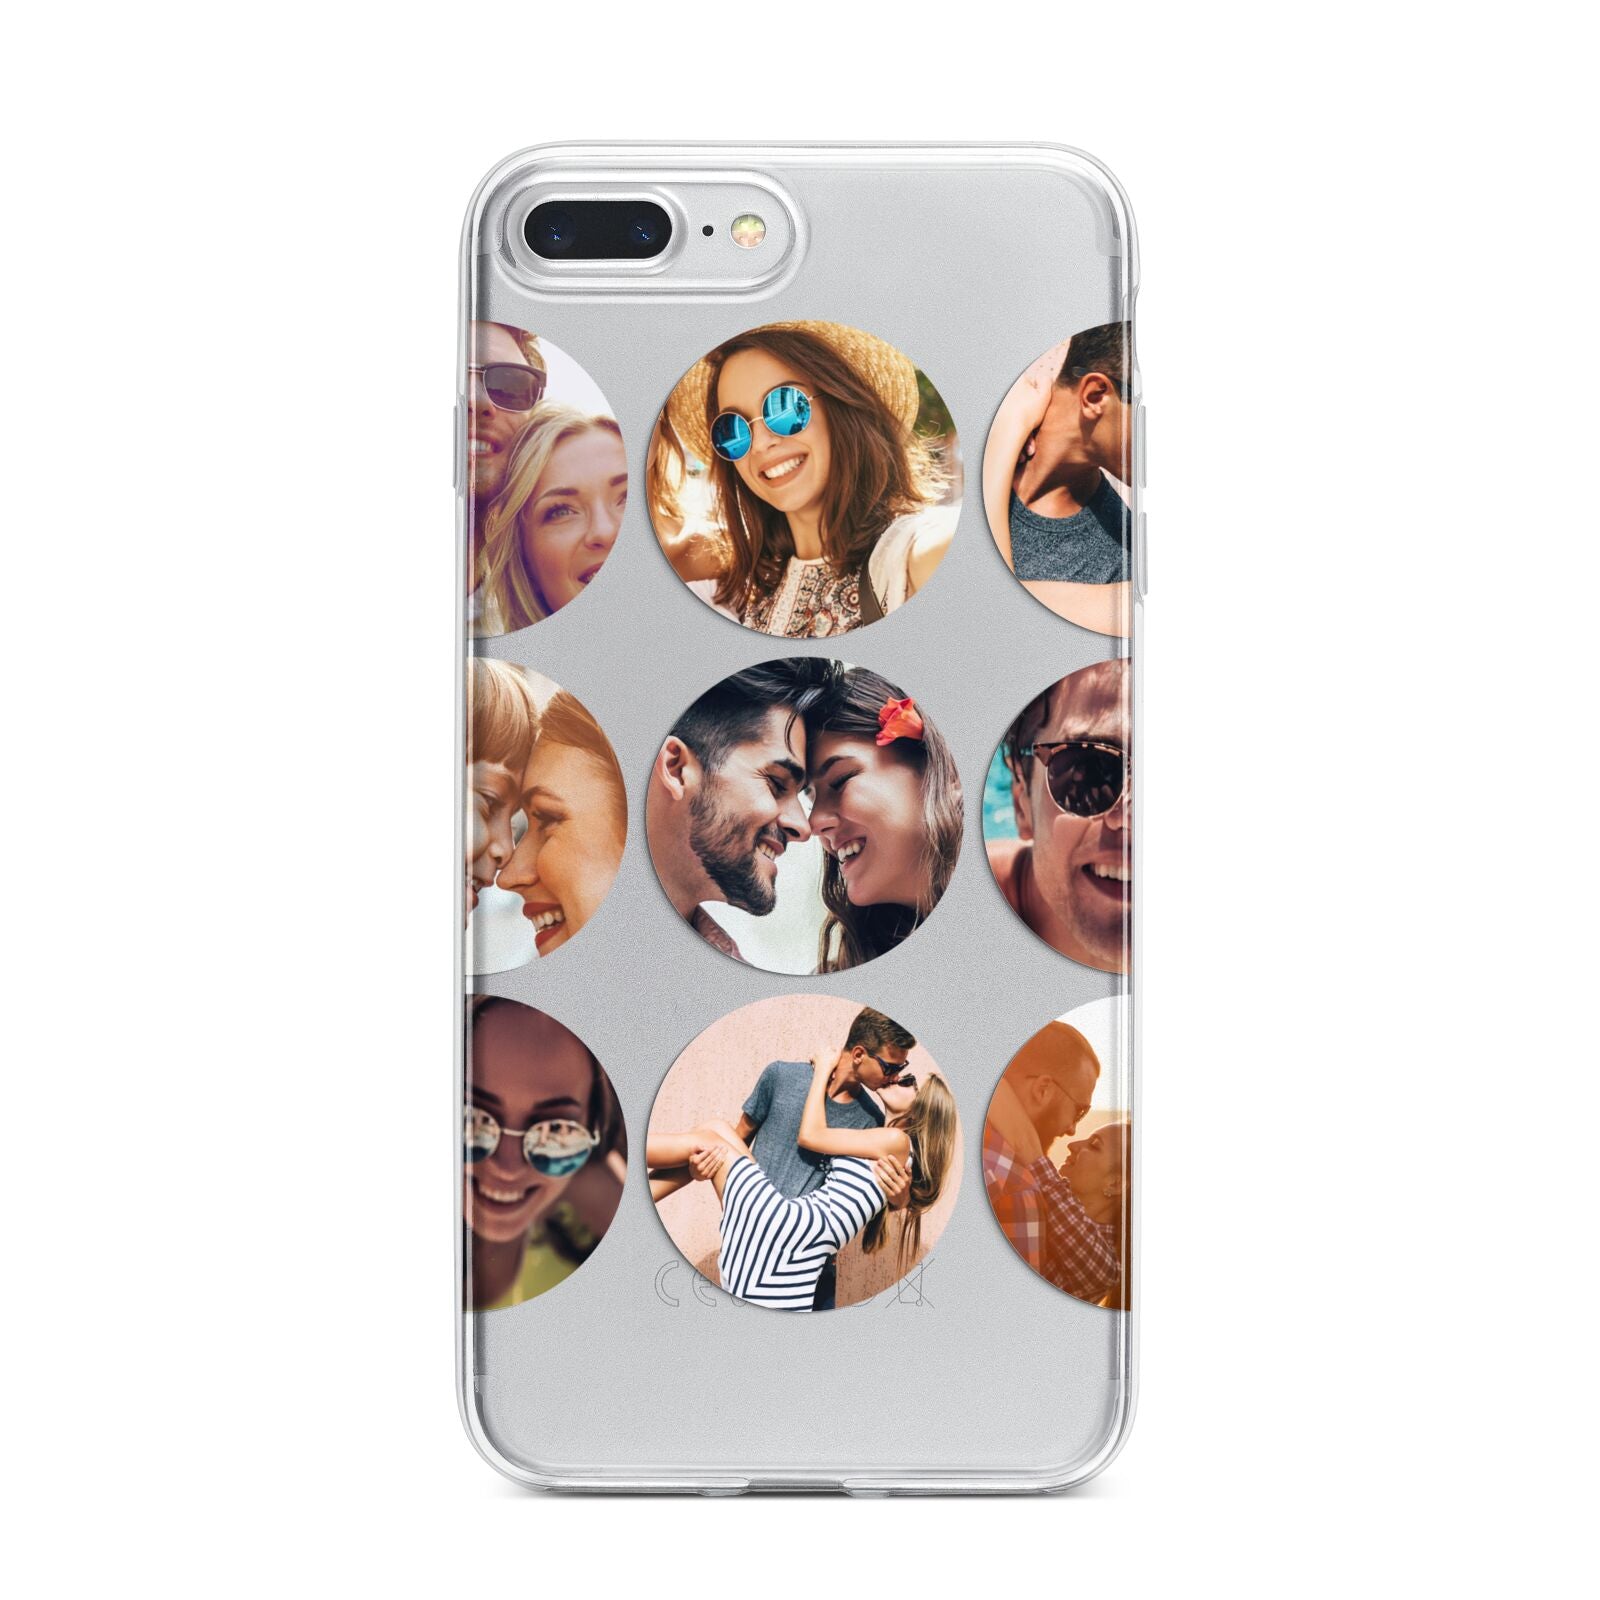 Circular Photo Montage Upload iPhone 7 Plus Bumper Case on Silver iPhone